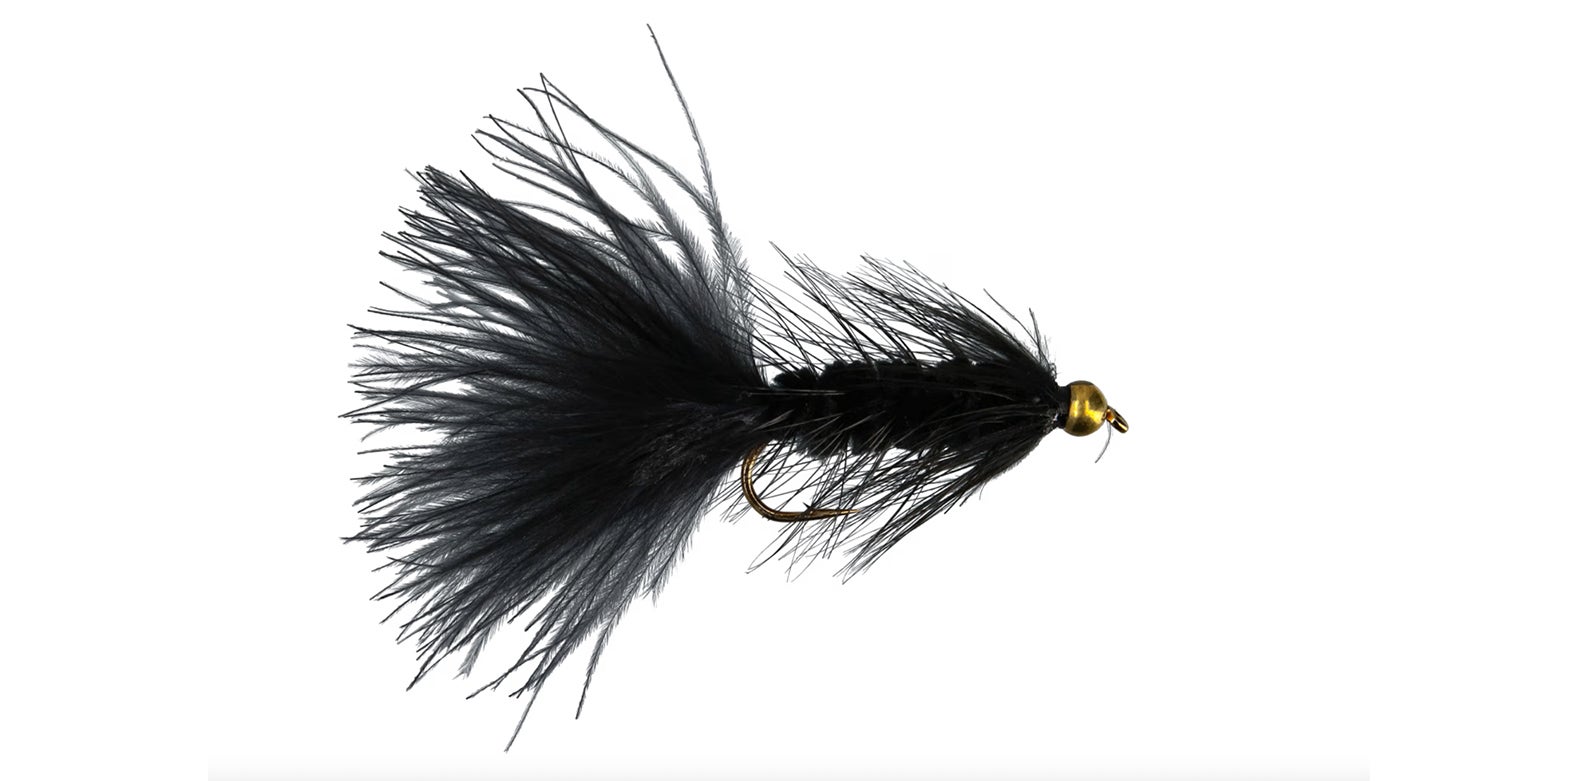 Squirmy Worm Material - 30 legs from My Fishing Flies